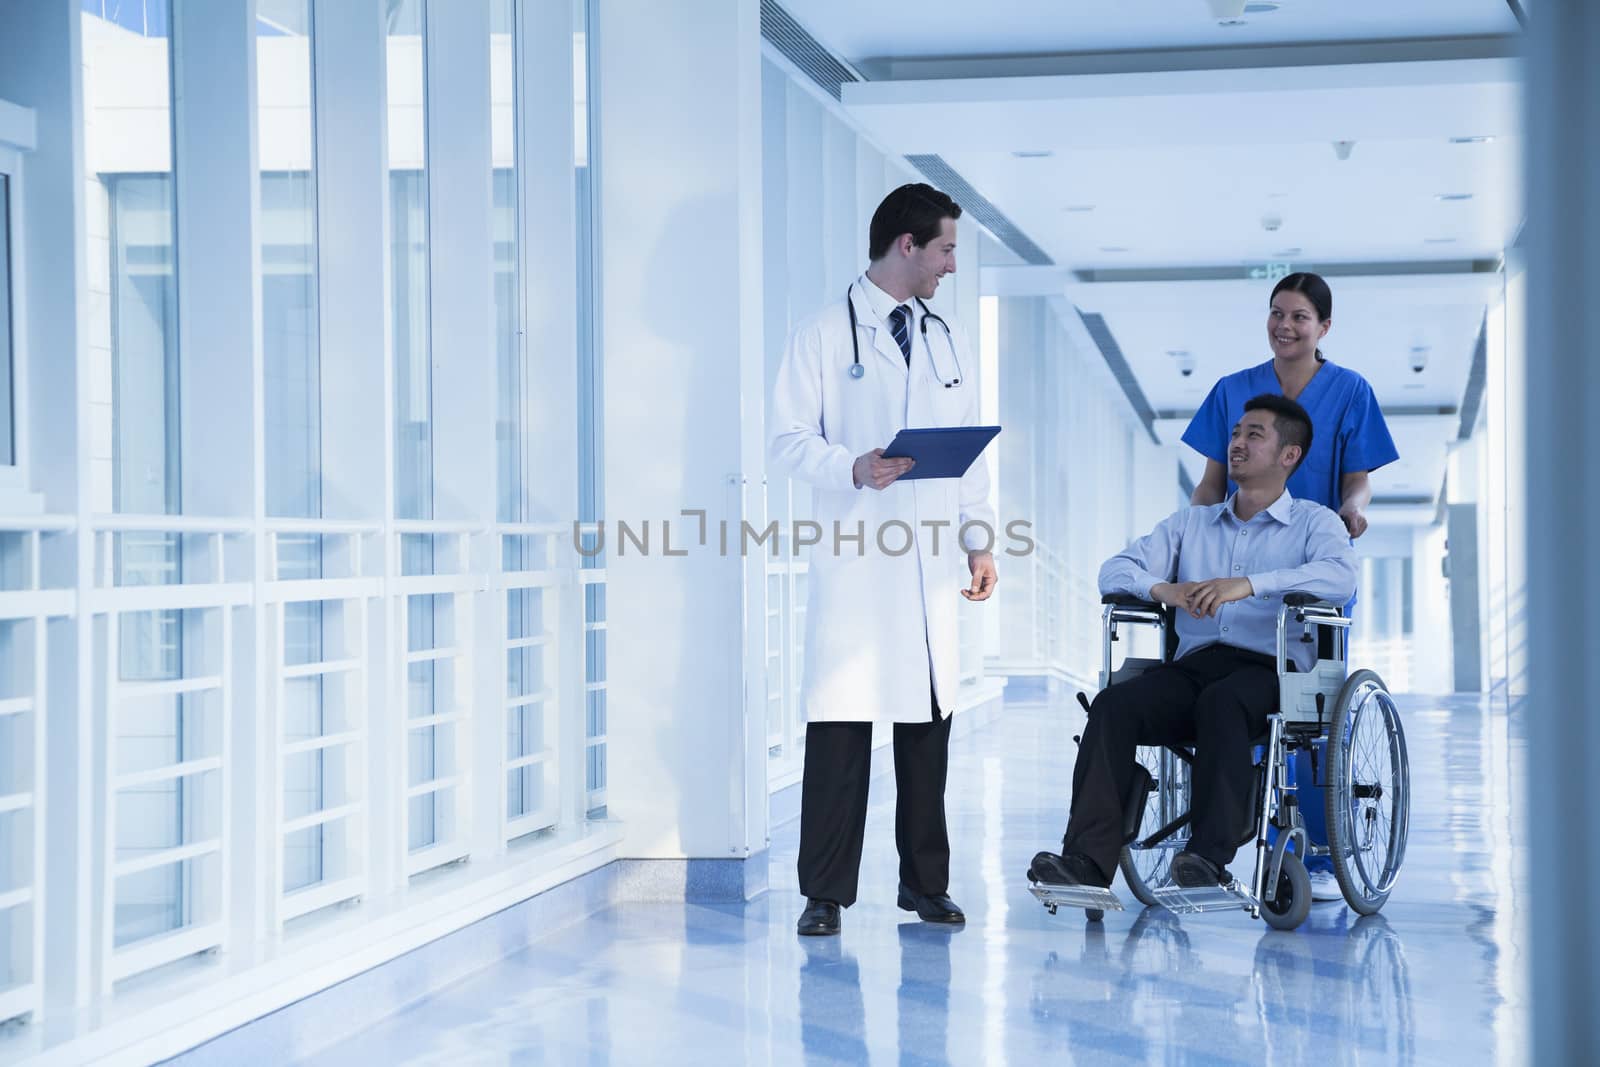 Smiling female nurse pushing and assisting patient in a wheelchair in the hospital, talking to doctor